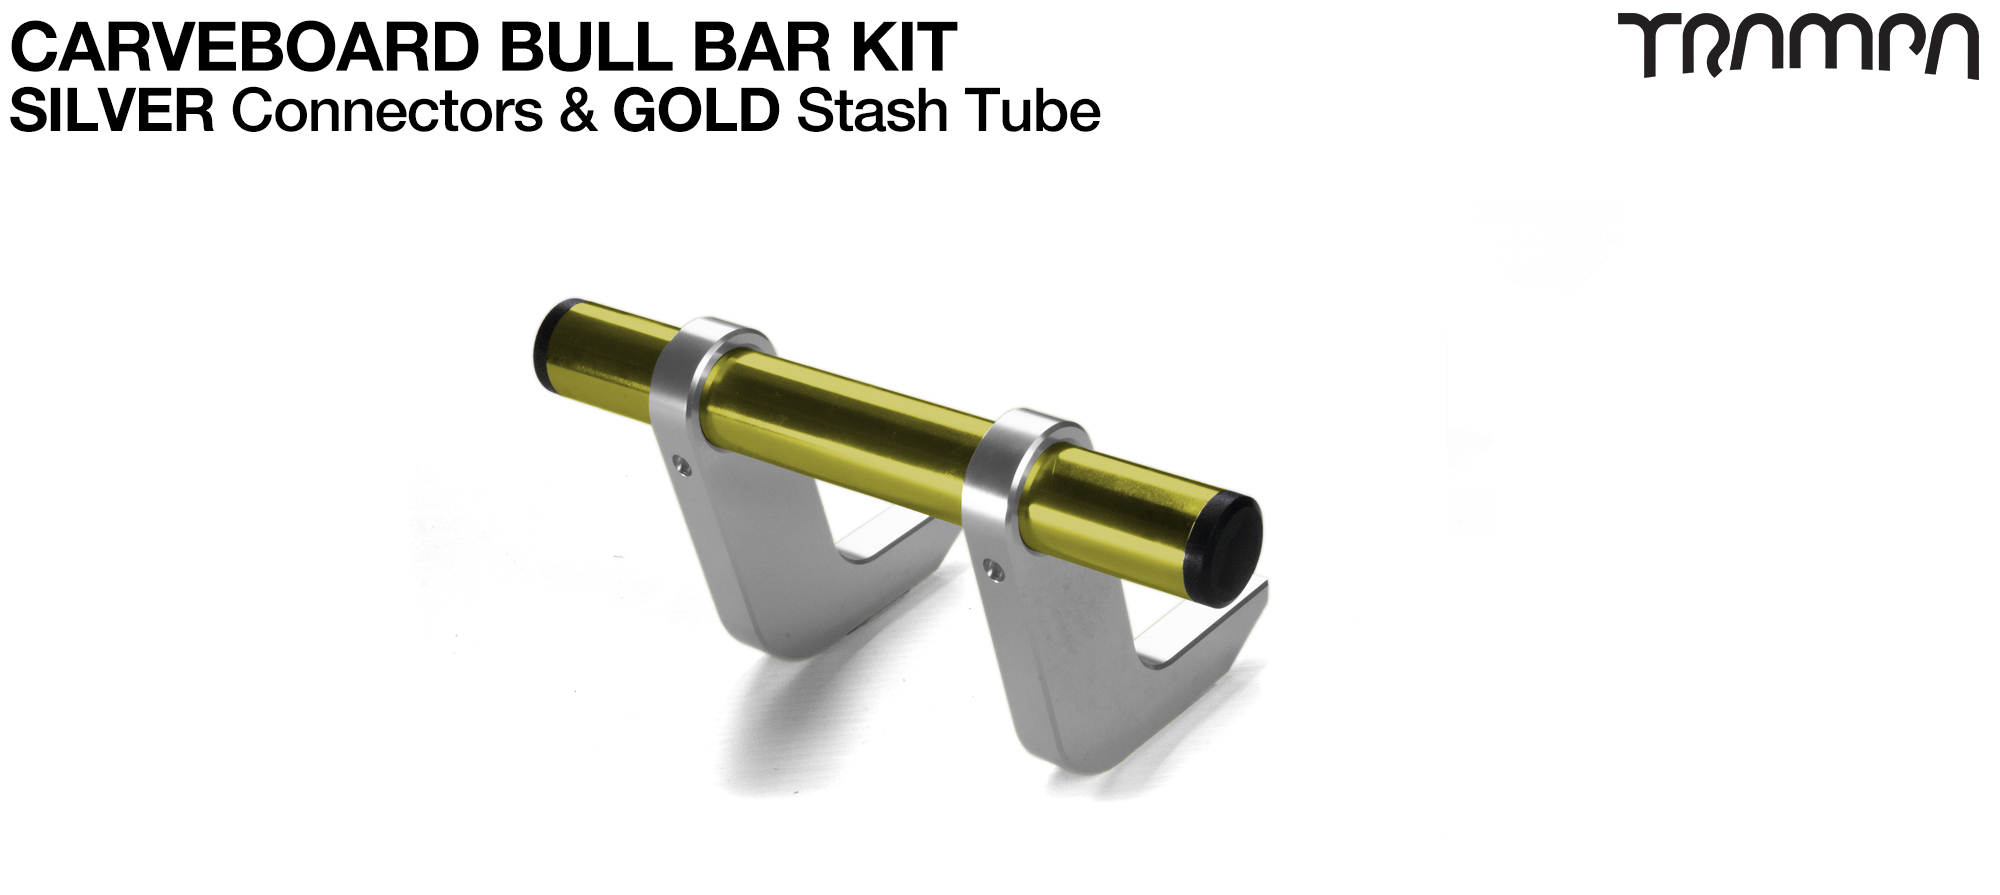 SILVER Uprights & GOLD Crossbar BULL BARS for CARVE BOARDS using T6 Heat Treated CNC'd Aluminum Clamps, Hollow Aluminium Stash Tubes with Rubber end bungs